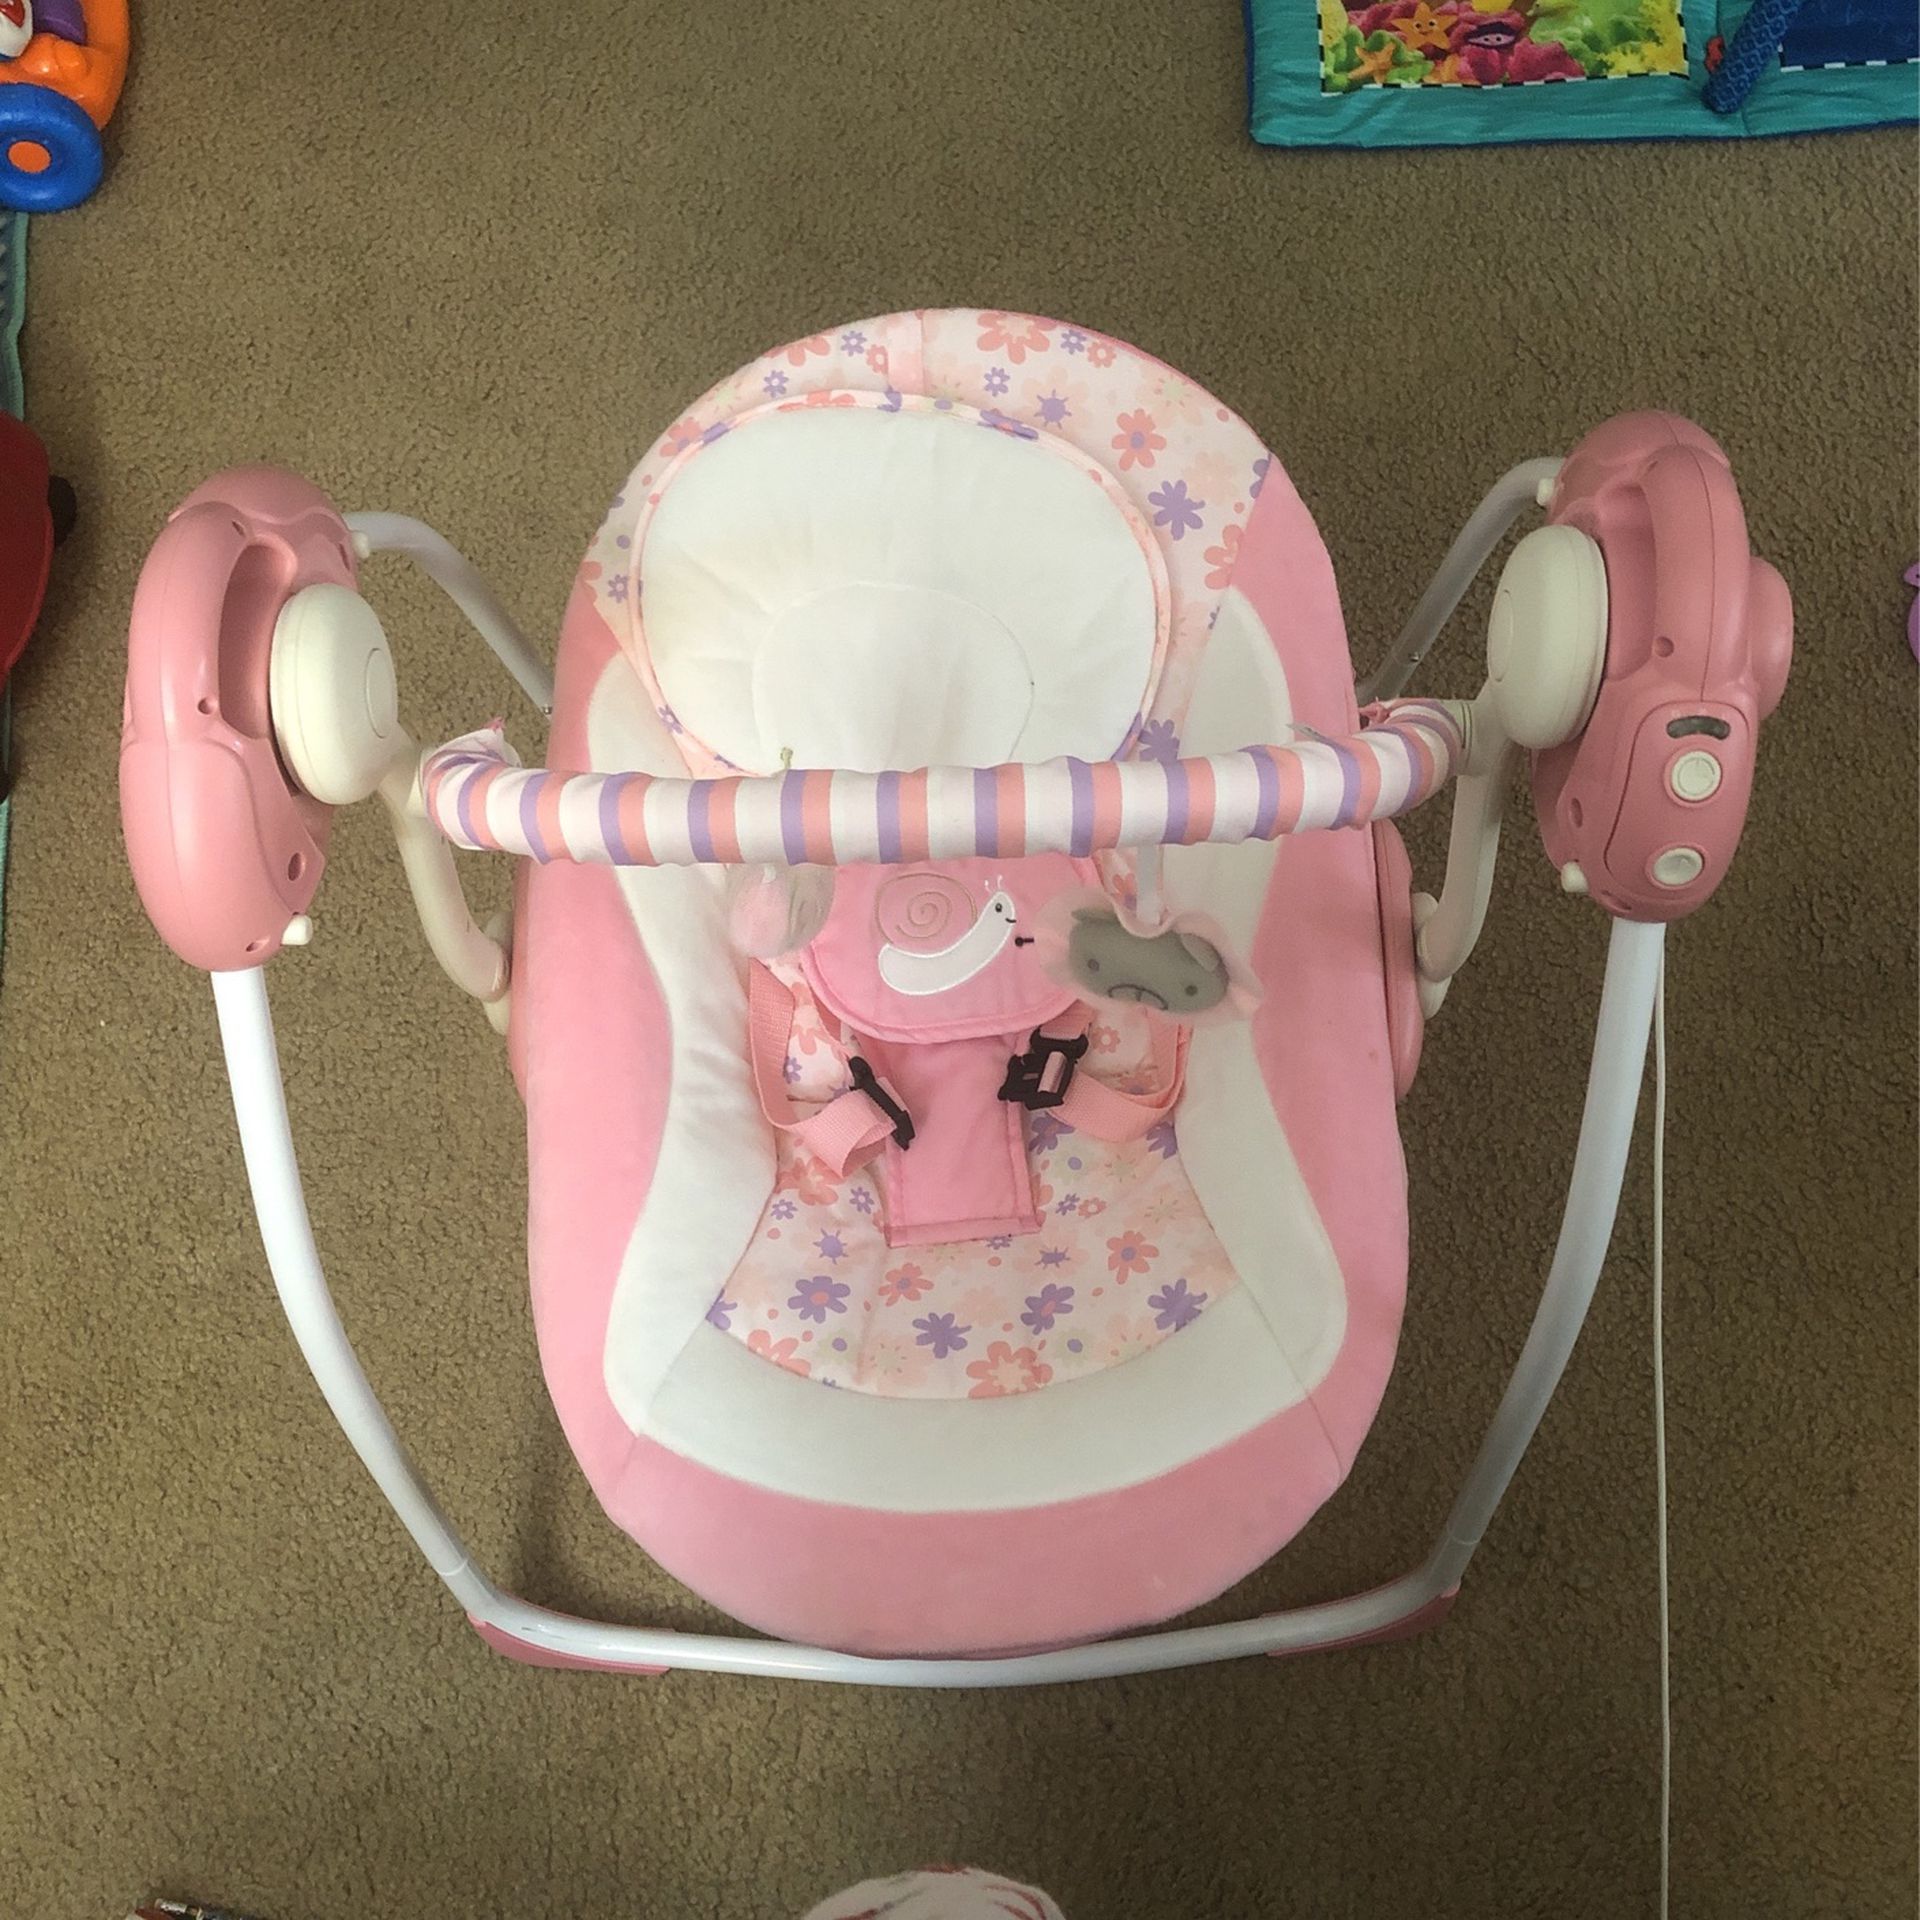 oothing Portable Swing，Comfort Electric Baby Rocking Chair with Intelligent Music Vibration Box That Can Be Used from The Beginning of The Newborn (Pi